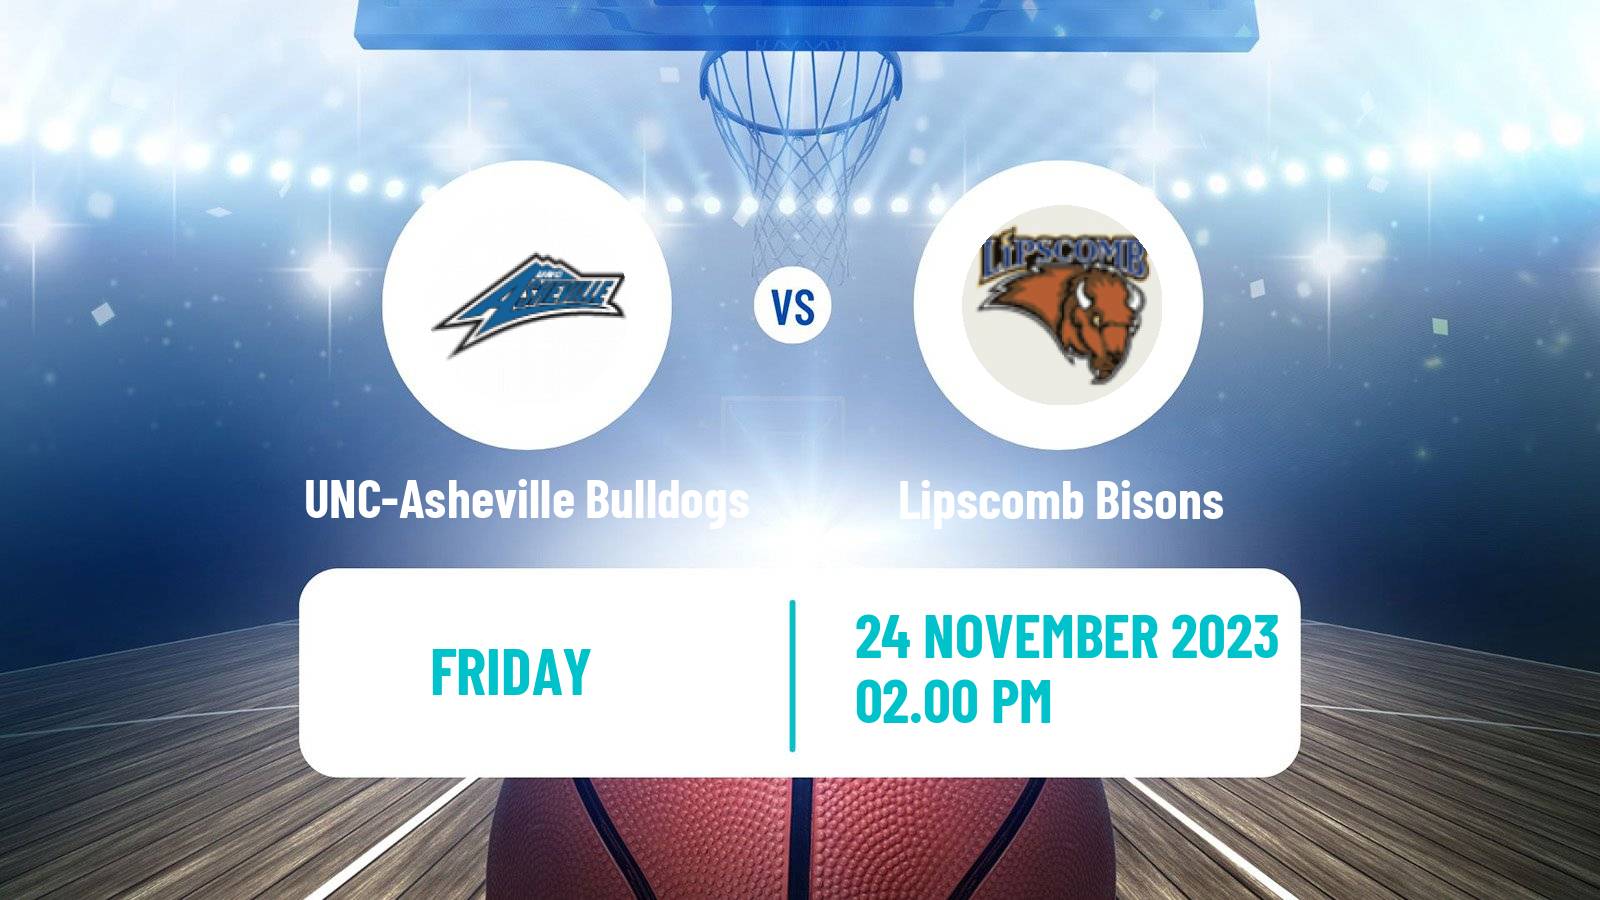 Basketball NCAA College Basketball UNC-Asheville Bulldogs - Lipscomb Bisons